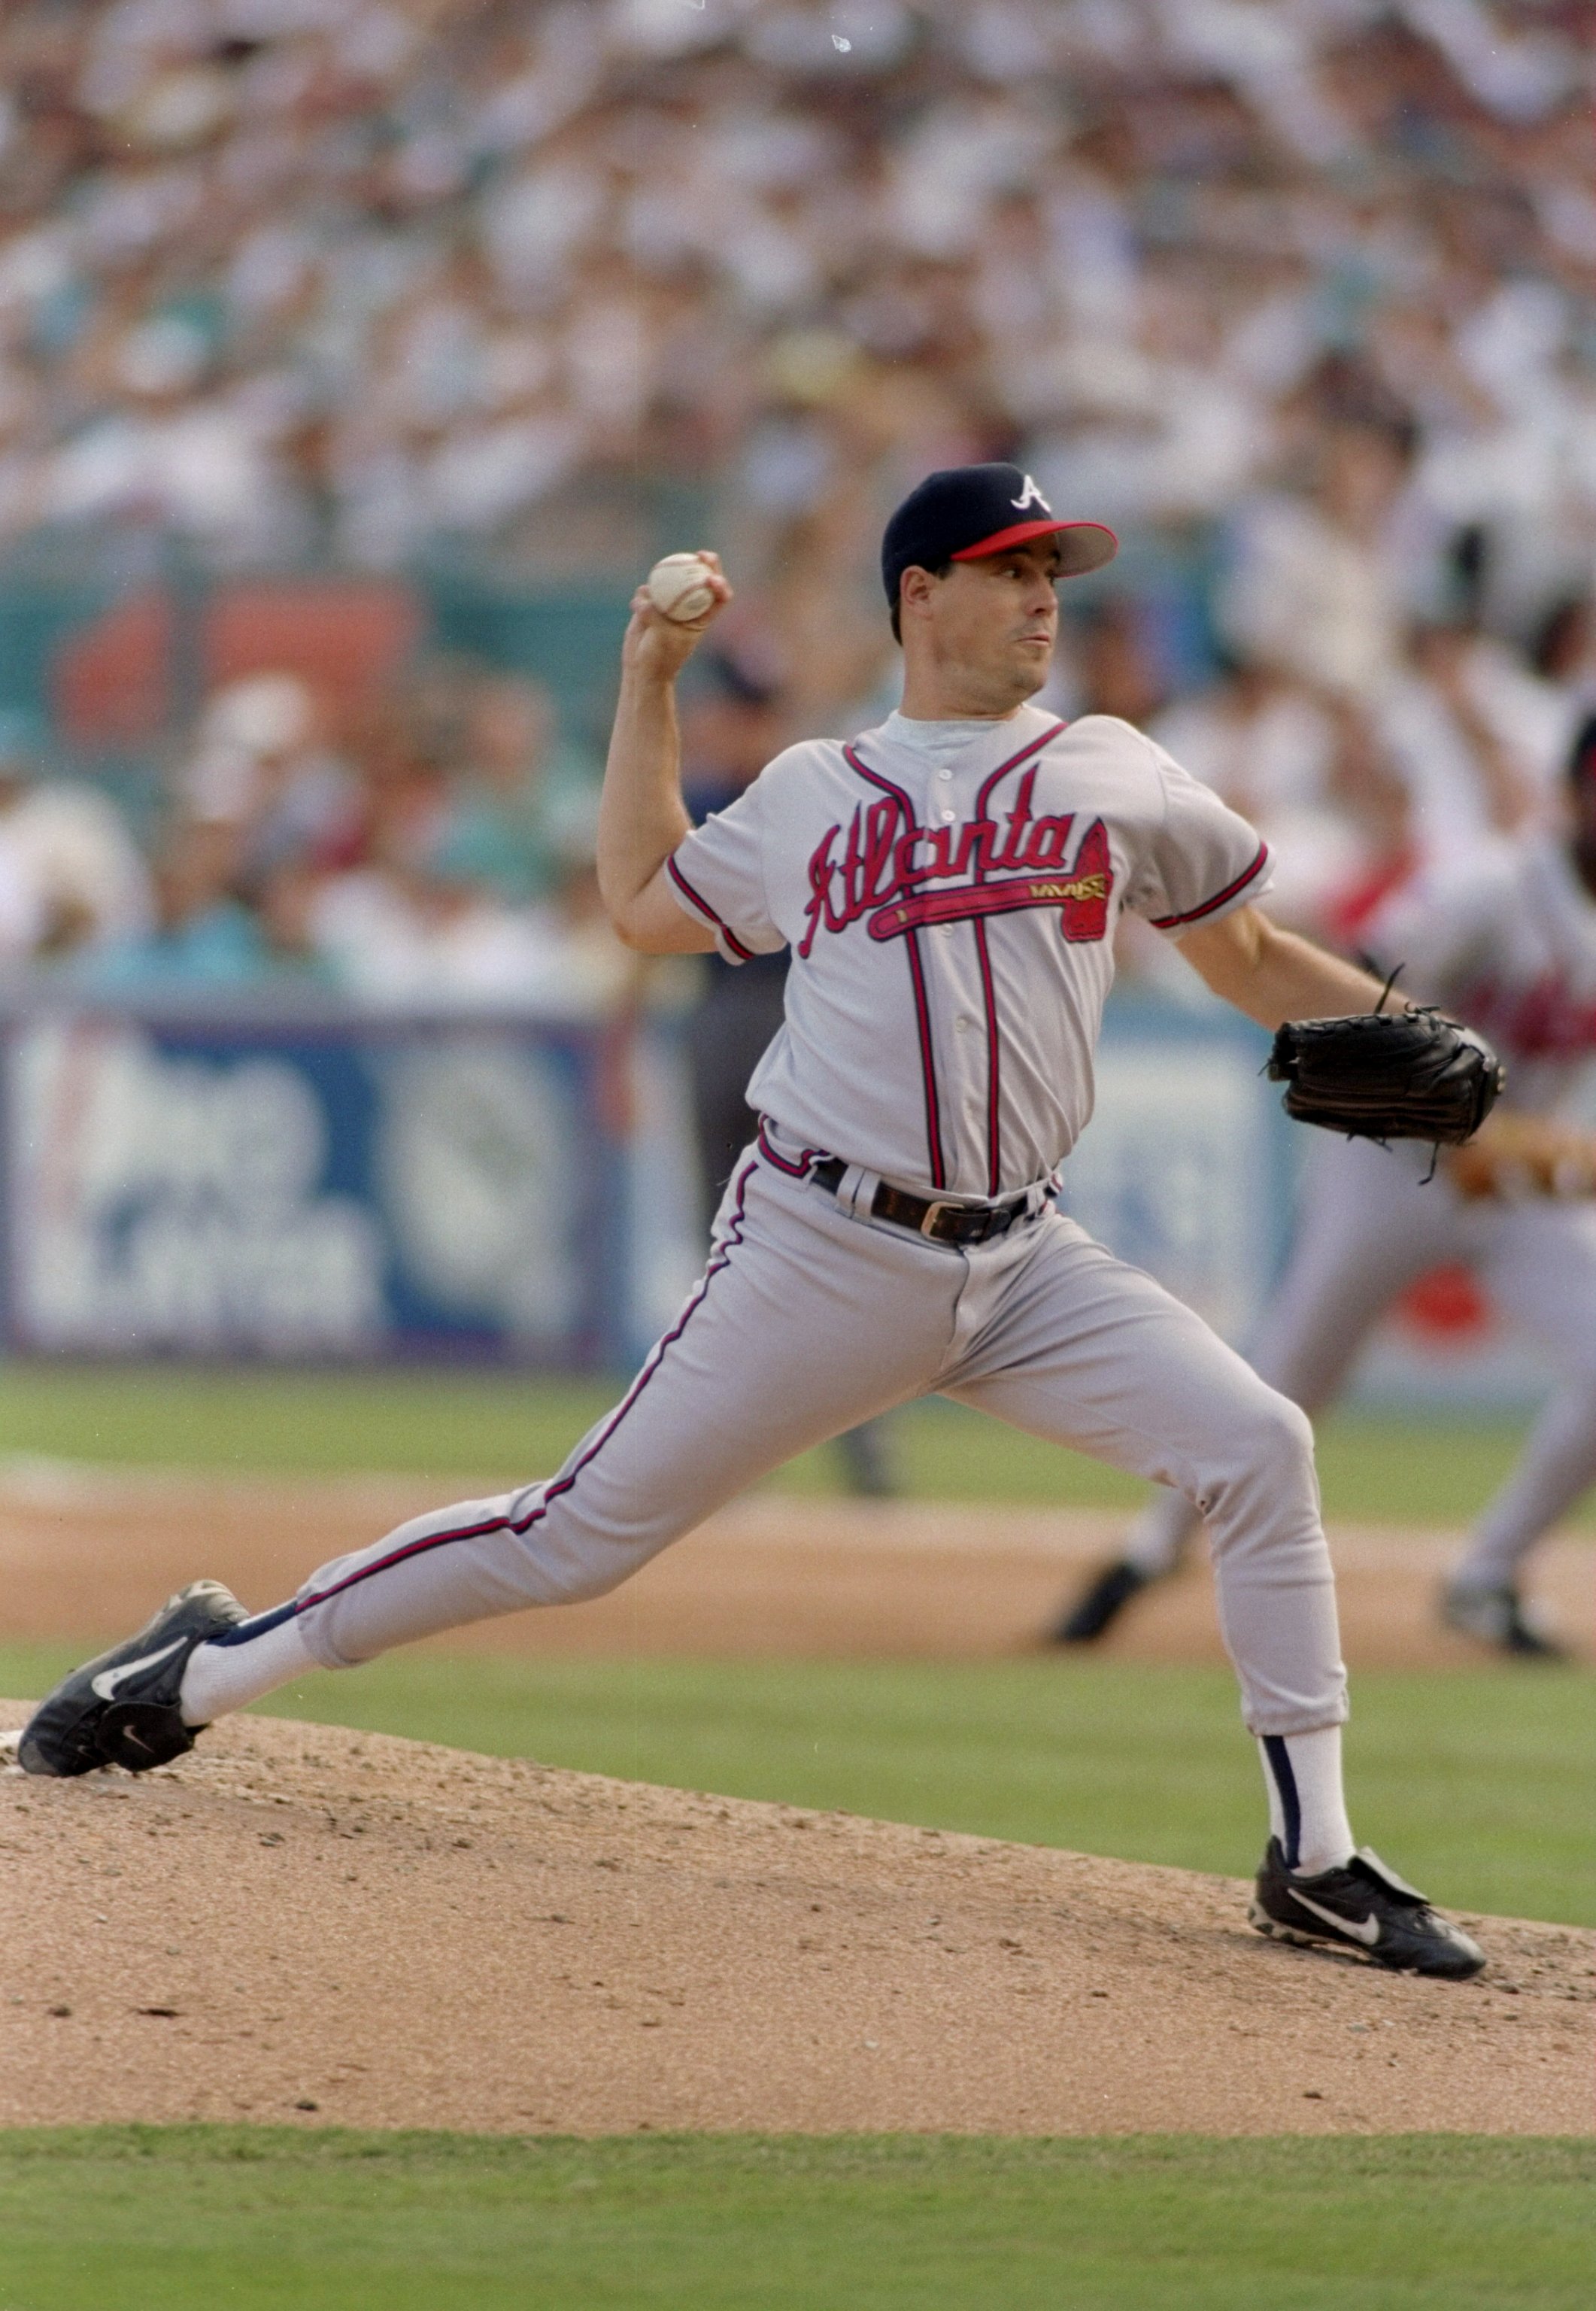 12 Oct 1997: Pitcher Greg Maddux of the Atlanta Braves throws a pitch during game five of the National League Championship Series against the Florida Marlins at Pro Player Park in Miami, Florida. The Marlins won the game 2-1.